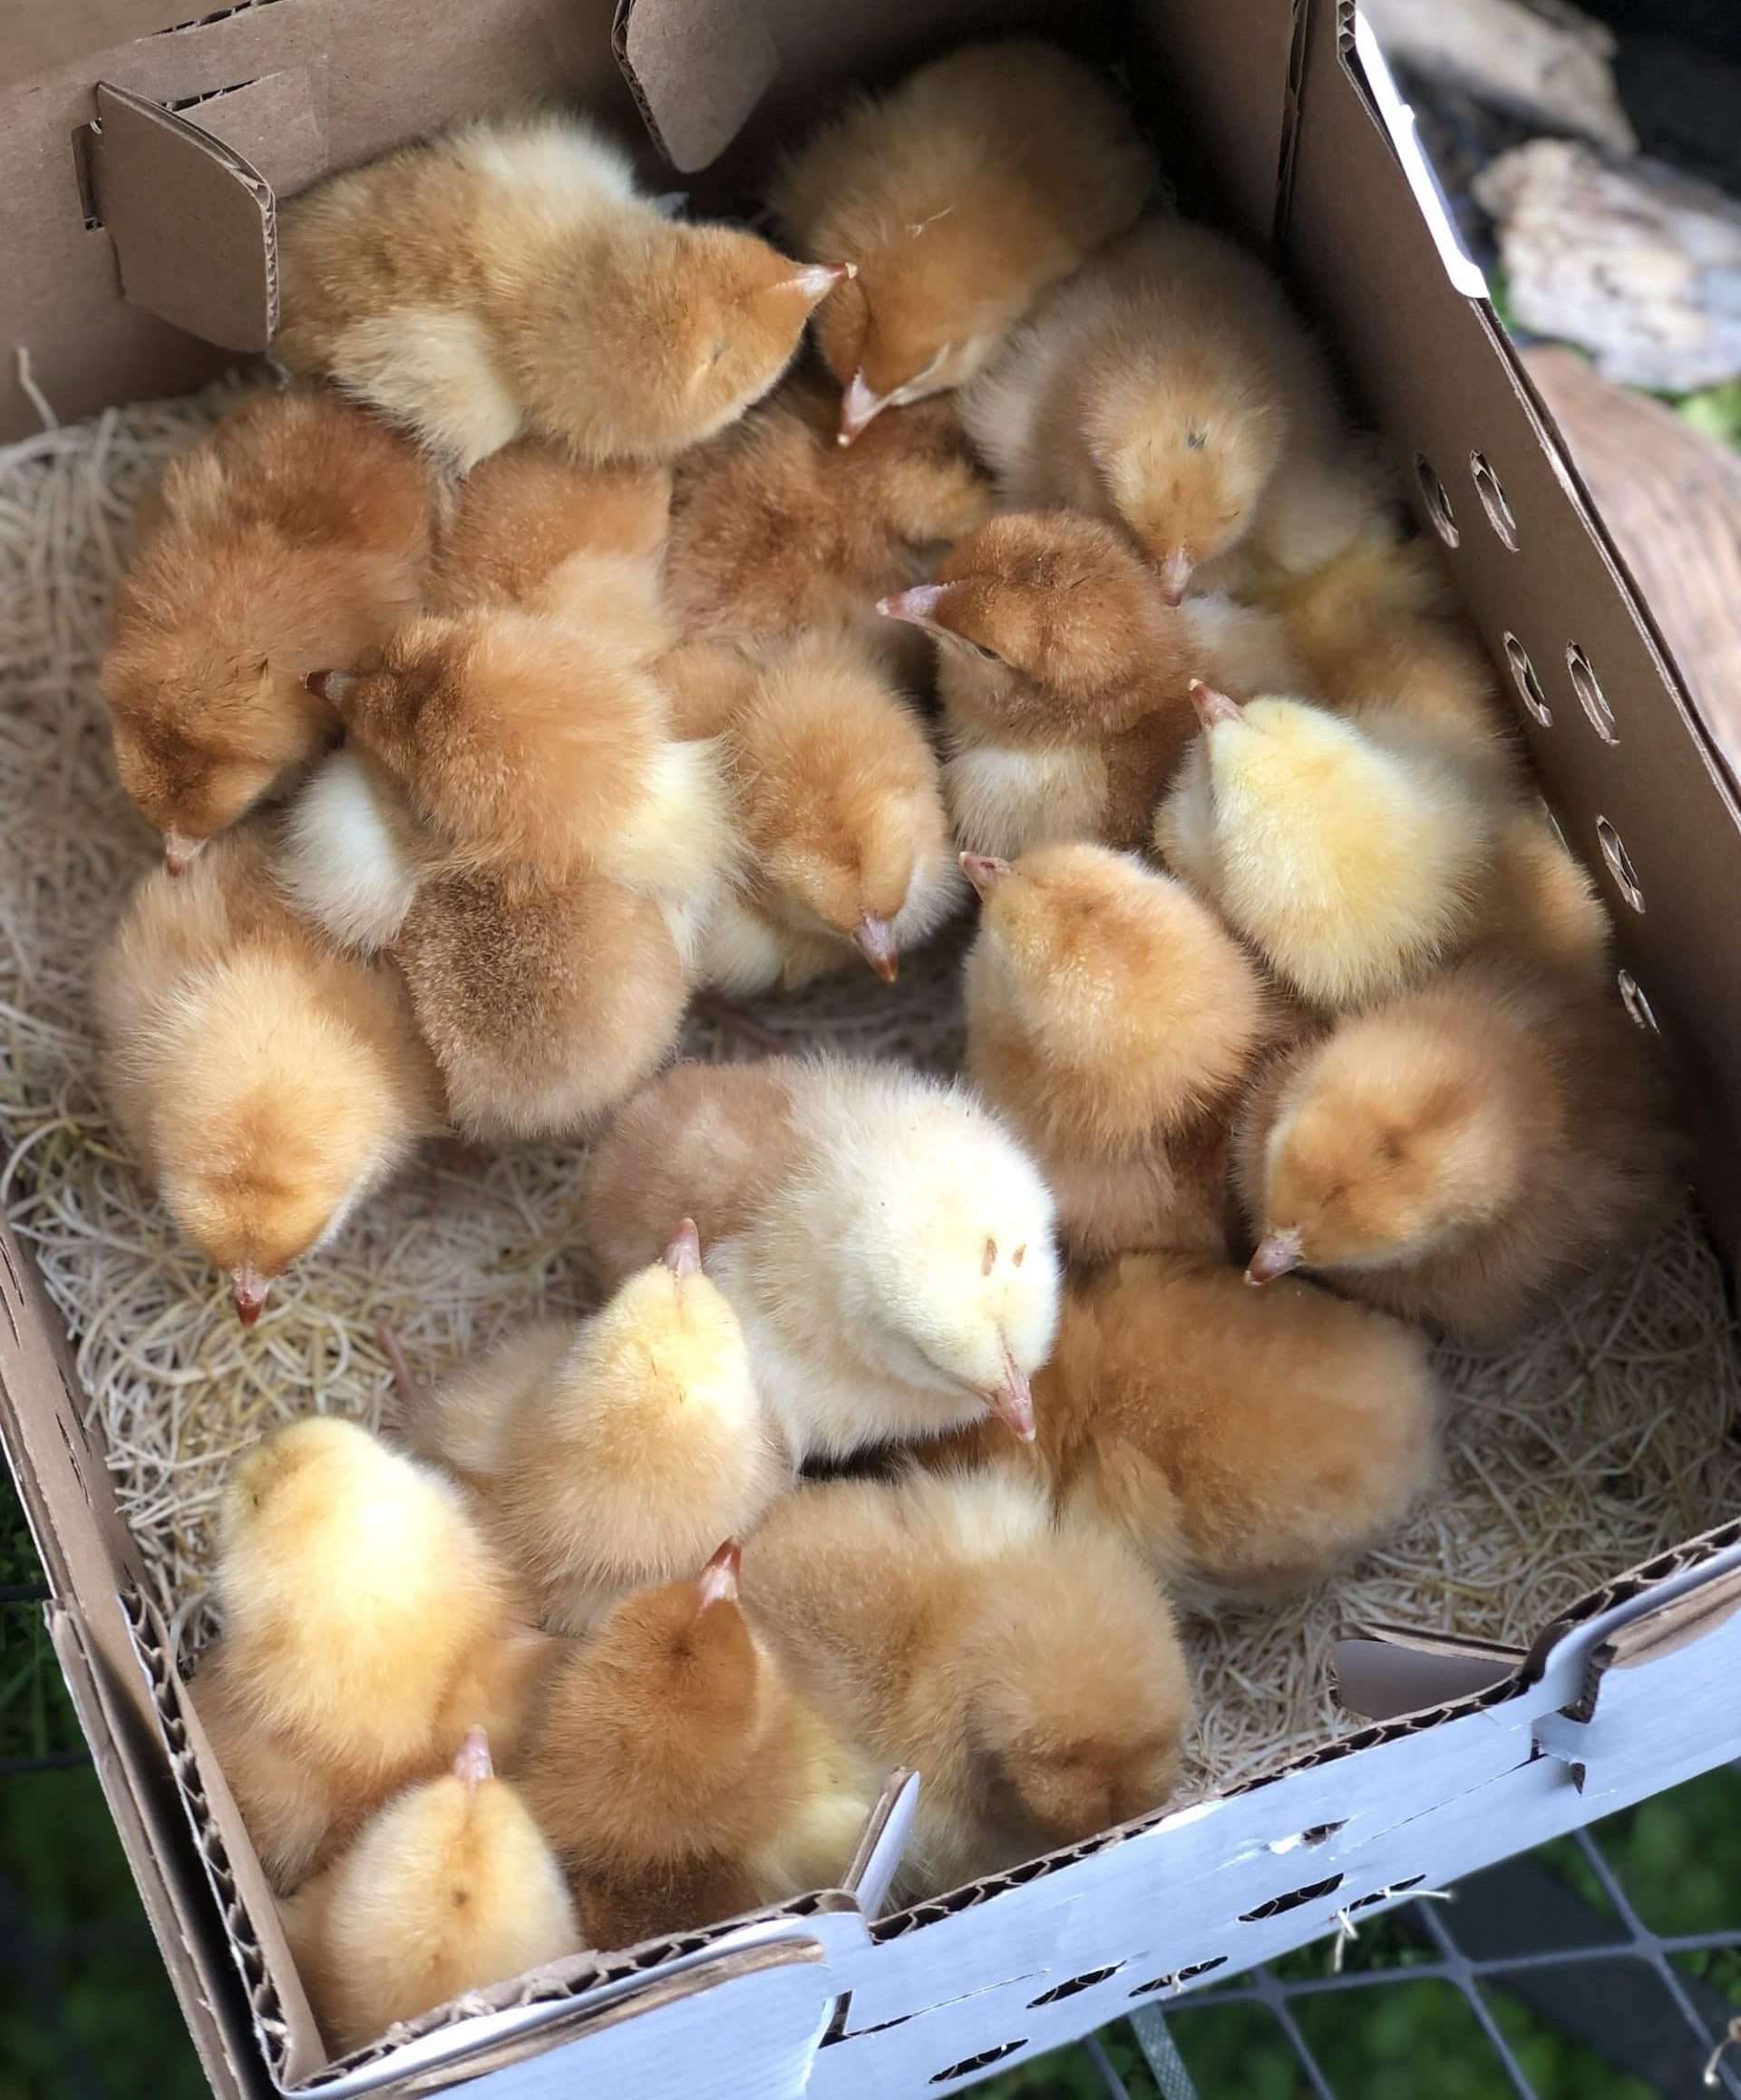 Baby chicks all together in a cardboard box